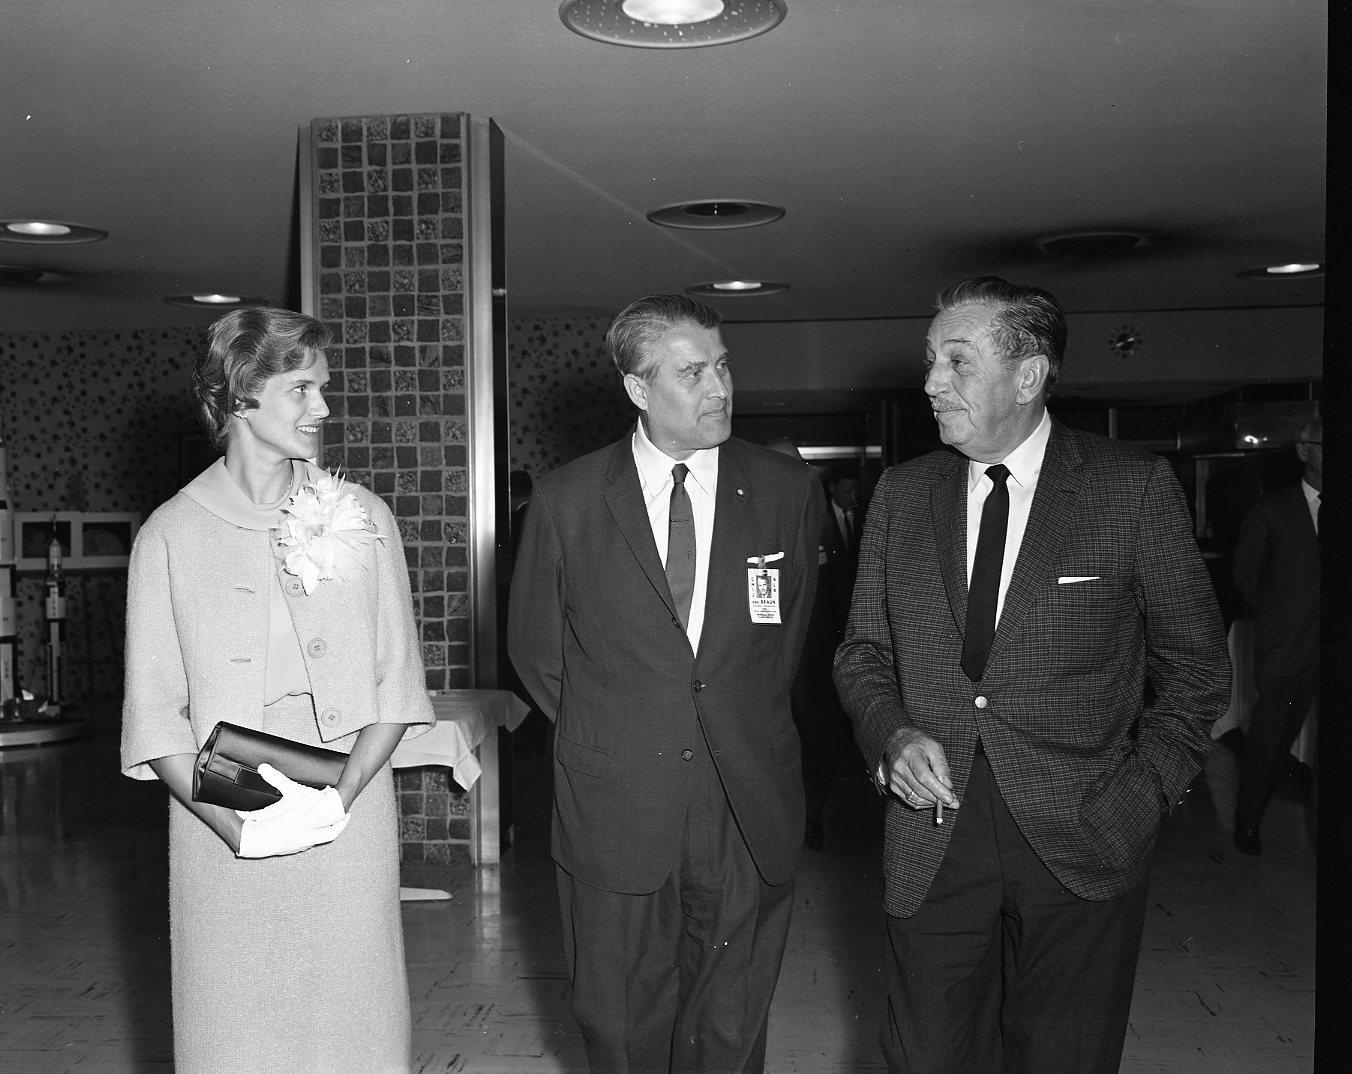 This week in 1965, world-renowned filmmaker and animator Walt Disney, right, visited NASA’s Marshall Space Flight Center. 